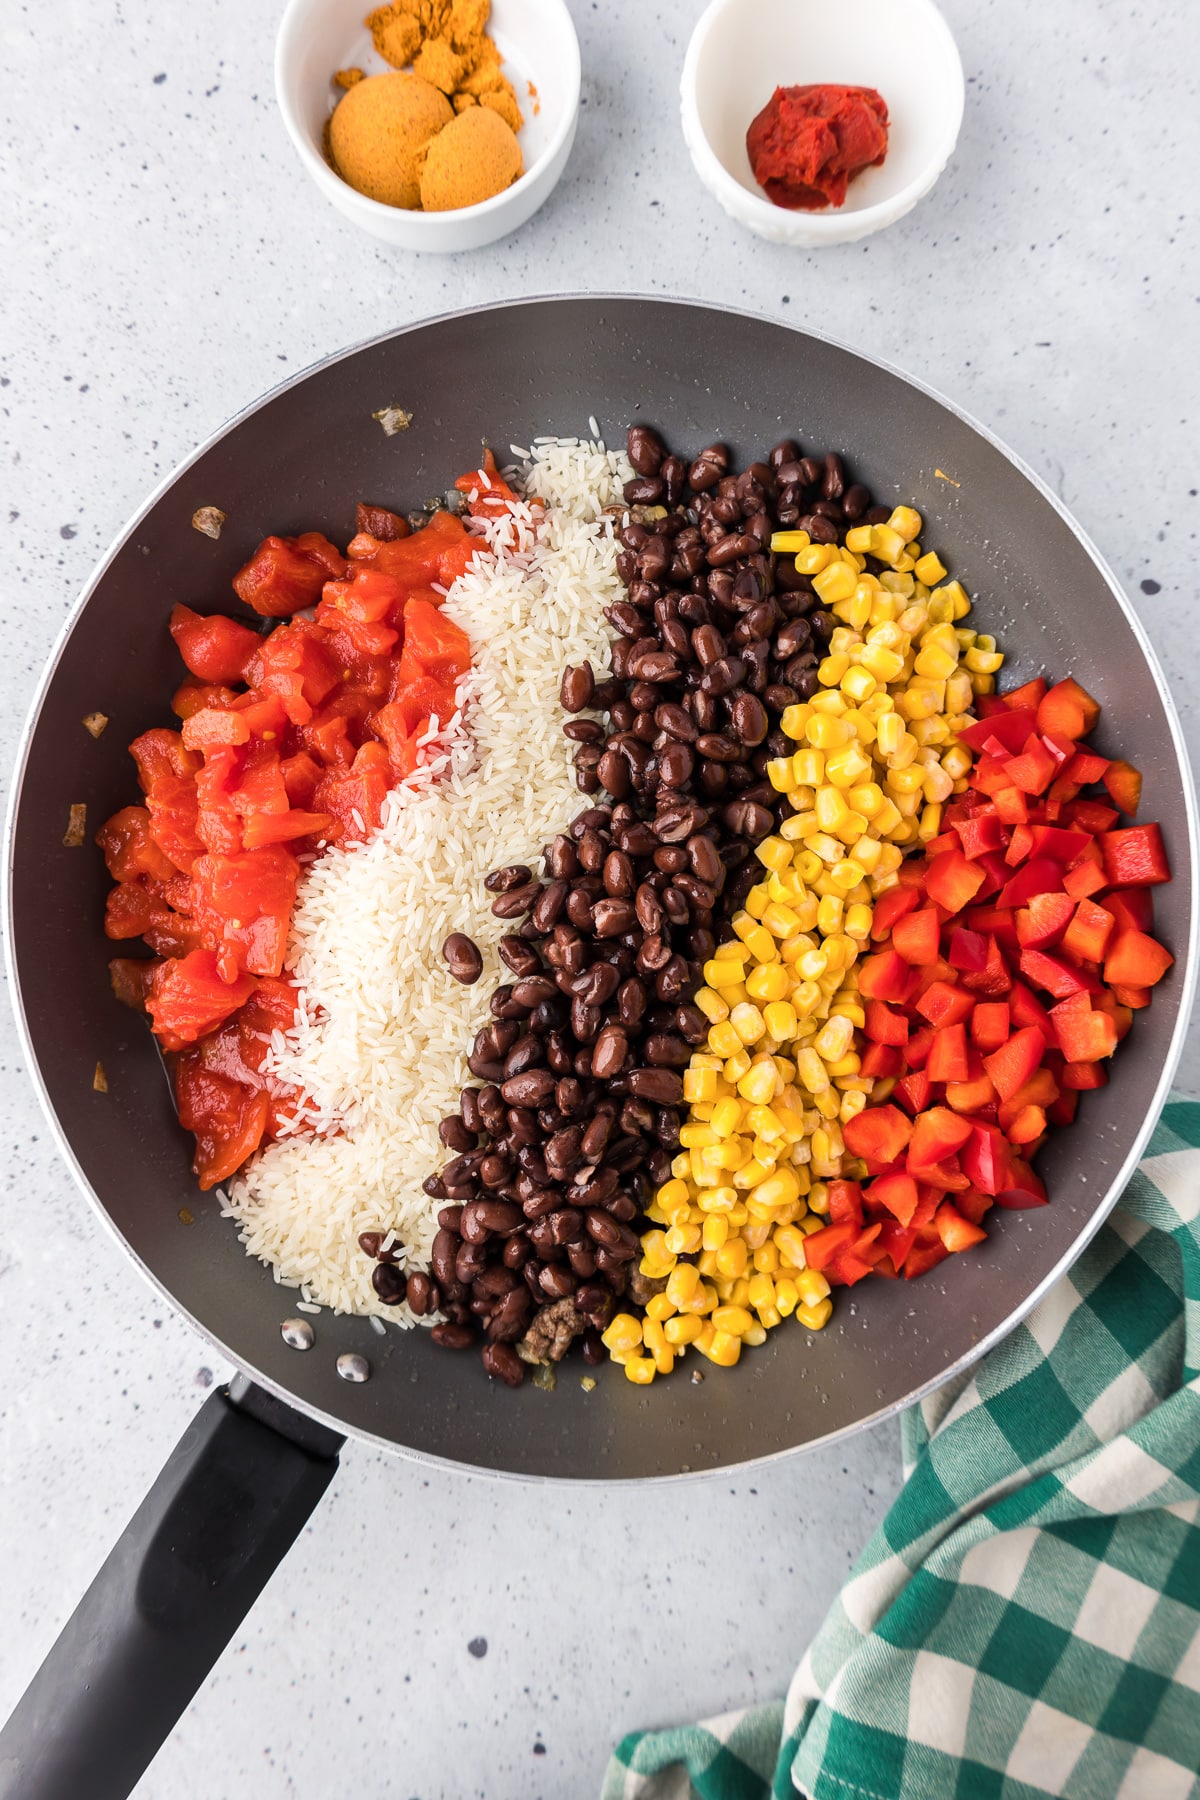 Tomatoes, rice, black beans, corn and red bell pepper added in rows in a skillet to cook with tomato paste and taco seasoning in small bowls nearby.